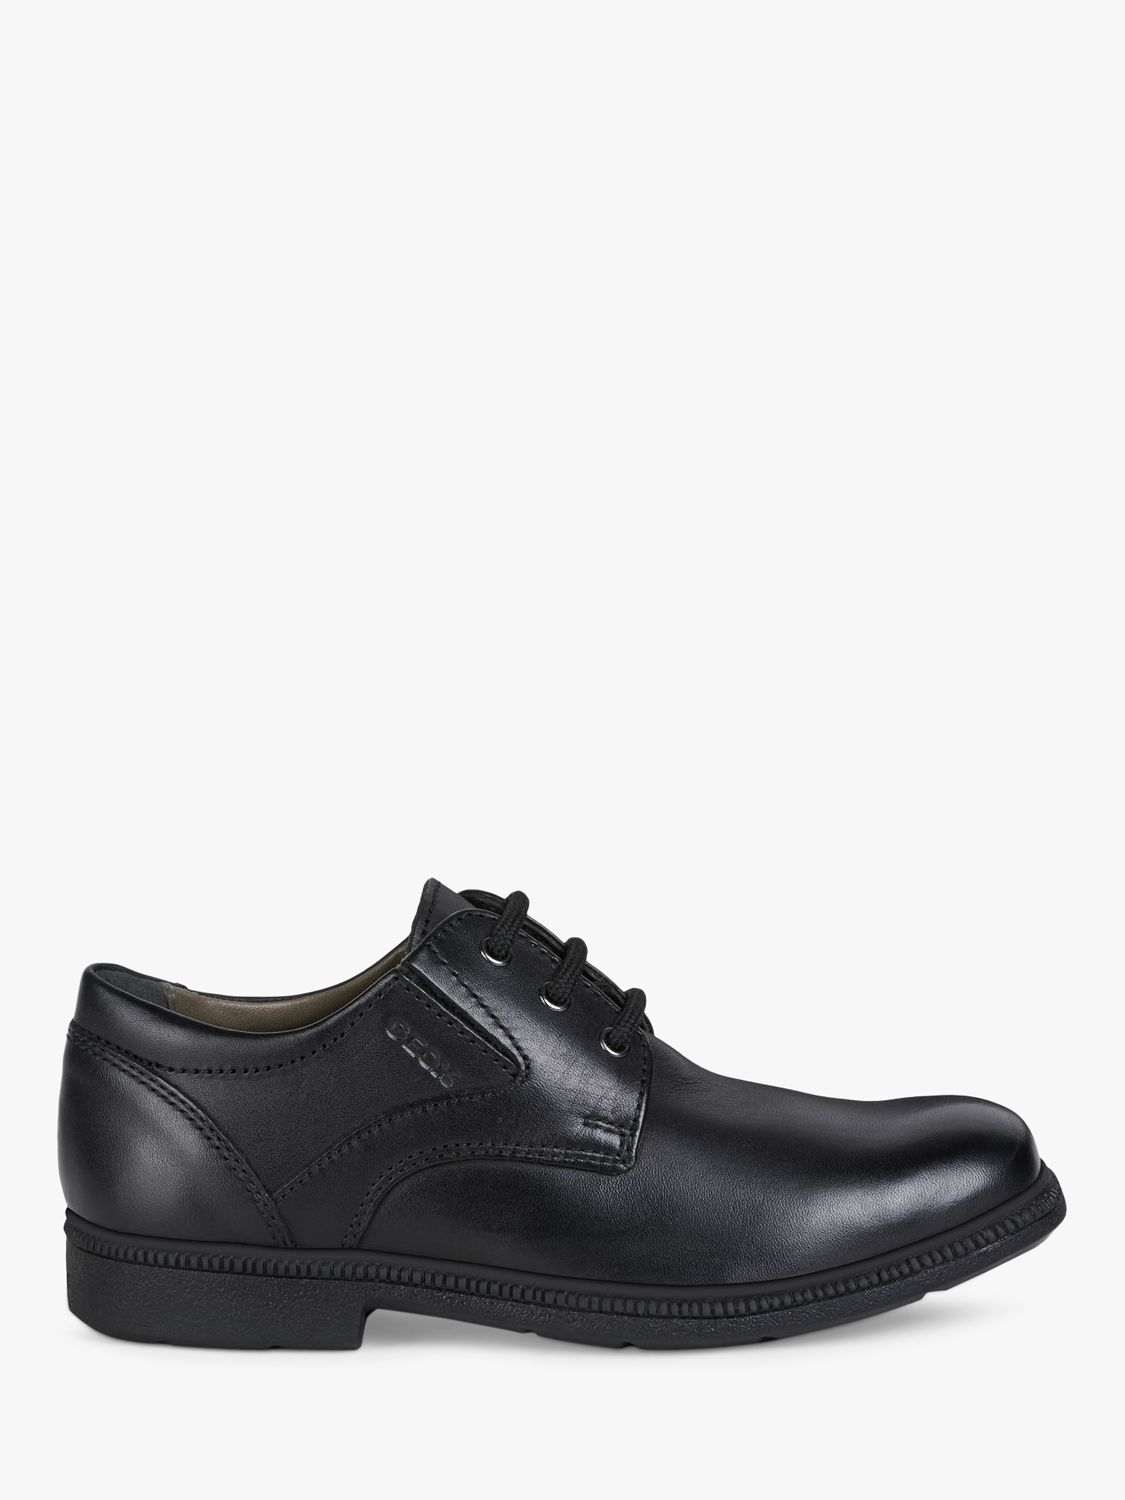 Buy Geox Federico Laced Shoes, Black Online at johnlewis